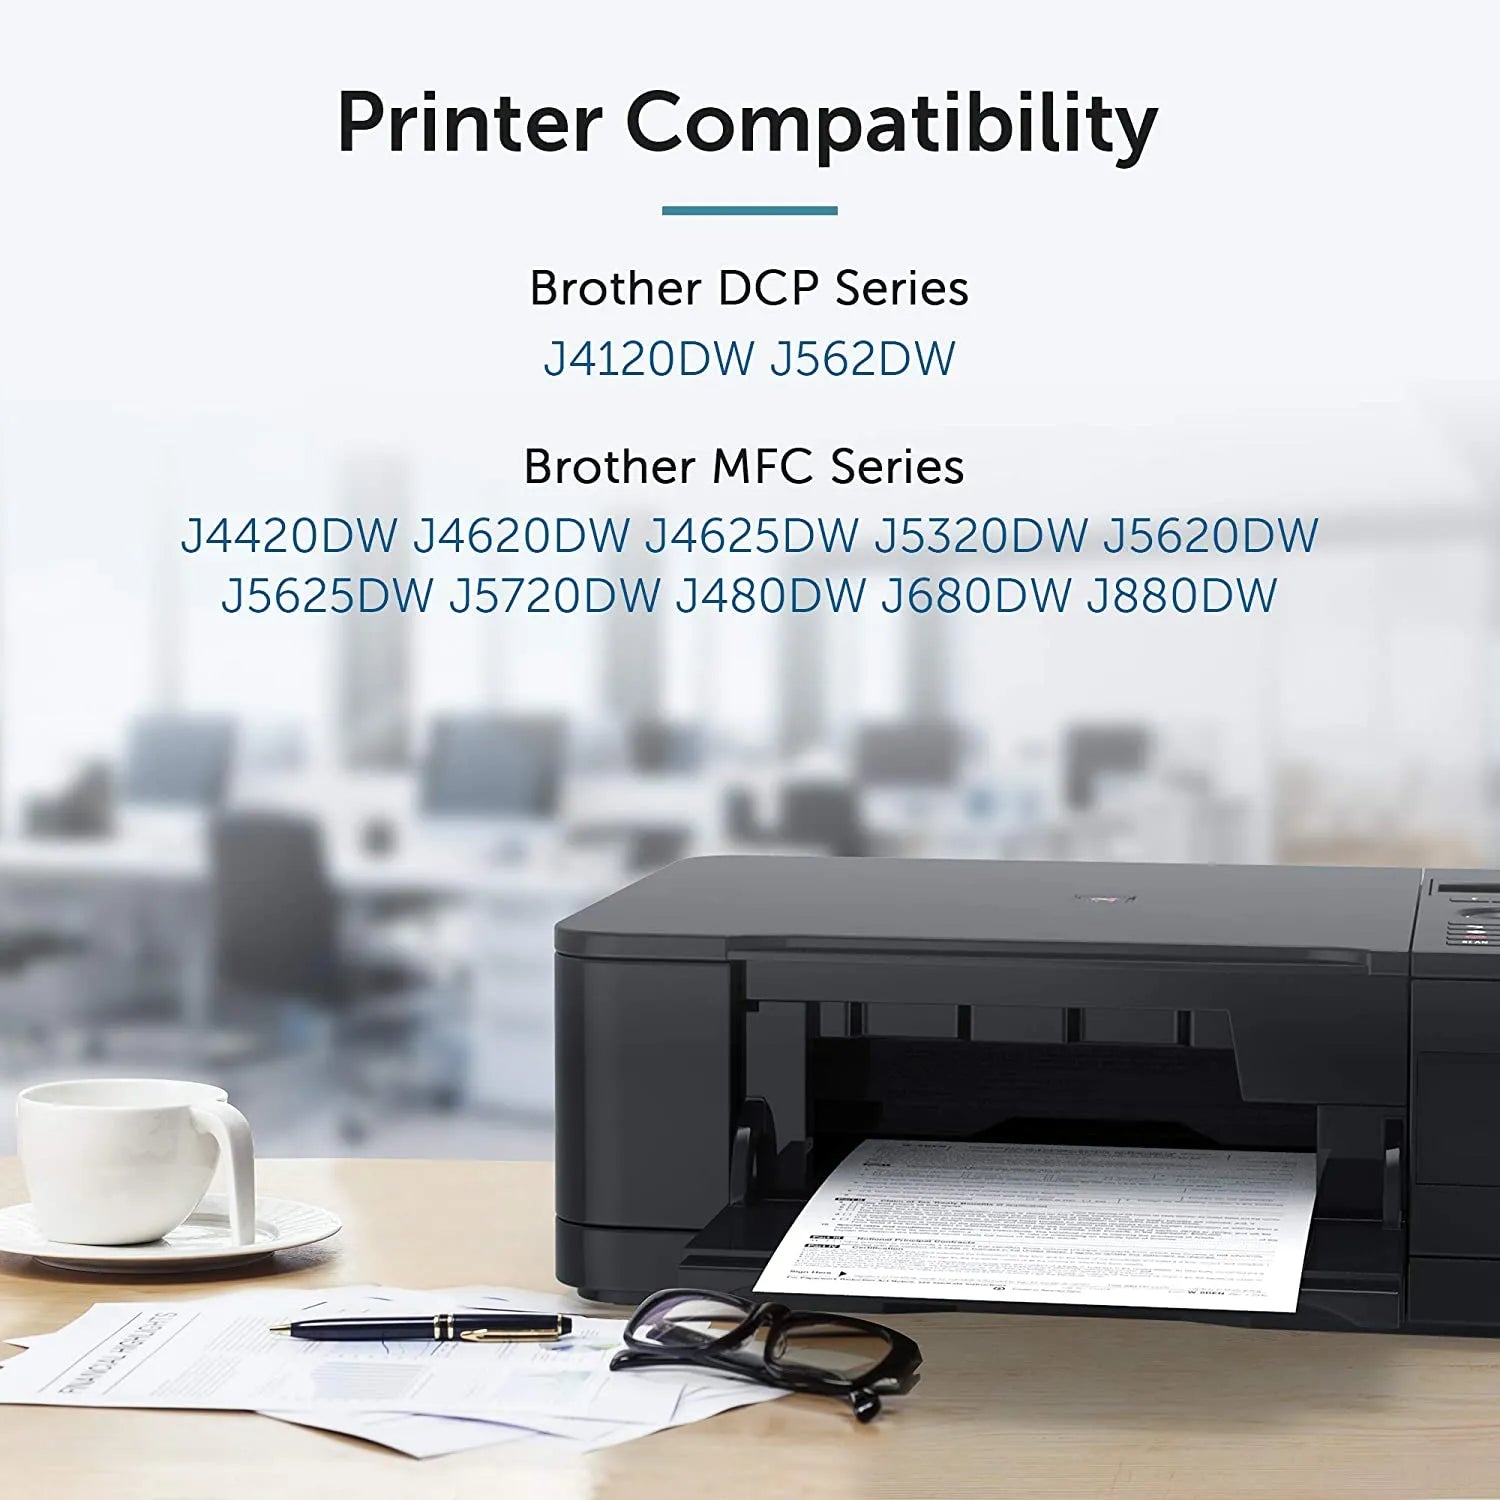 befon LC223 Ink Cartridges Compatible for Brother DCP-J4120DW DCP-J562DW MFC-J5320DW J880DW J5620DW J5625DW J680DW J4625DW